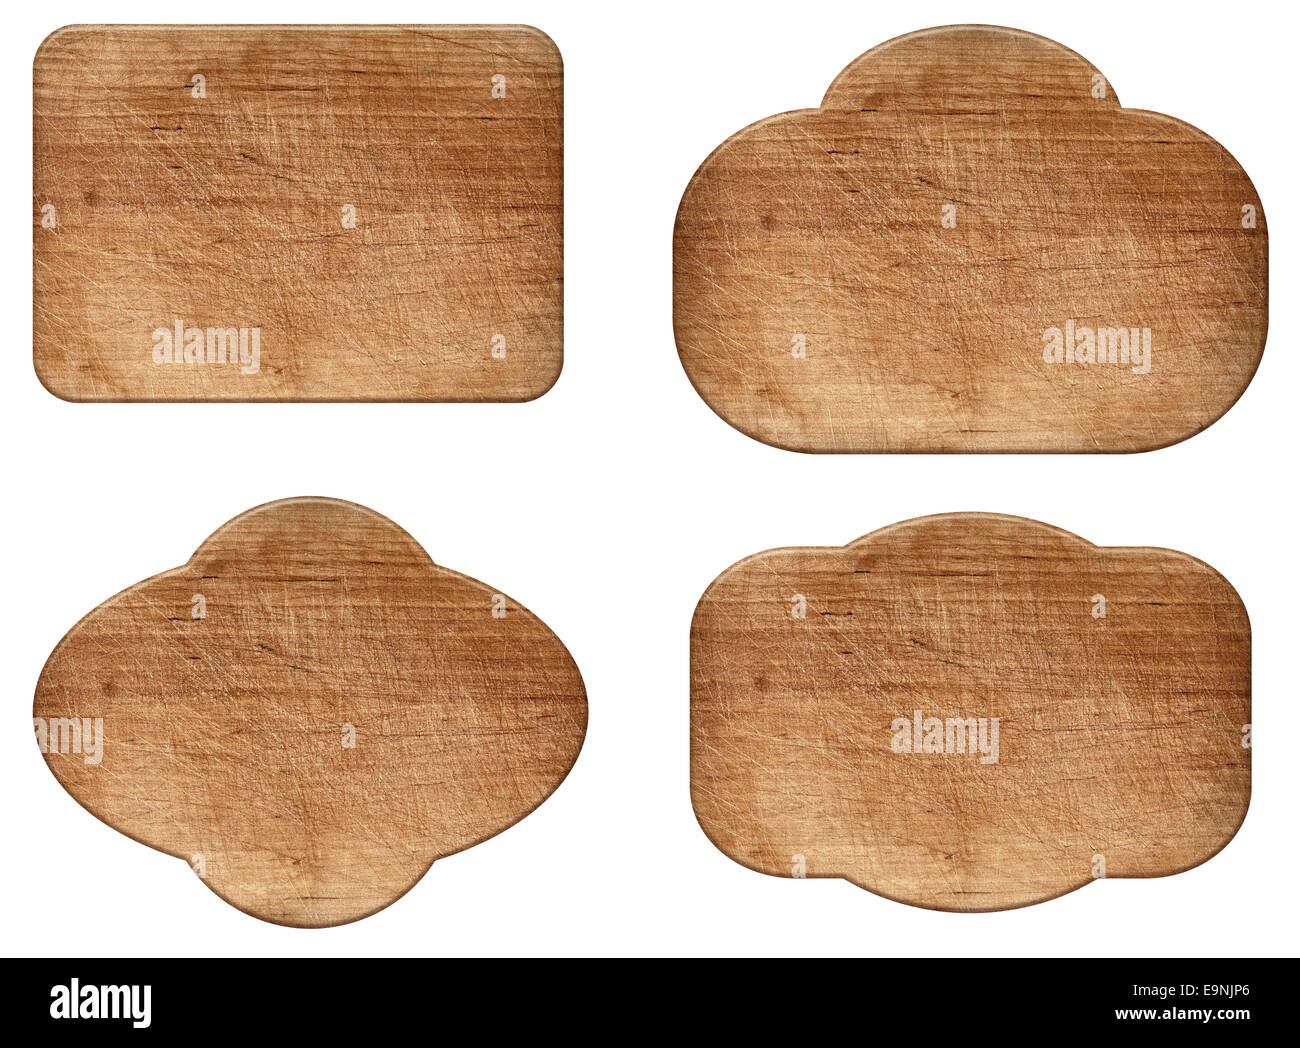 Set of various empty wooden sign or shapes Stock Photo